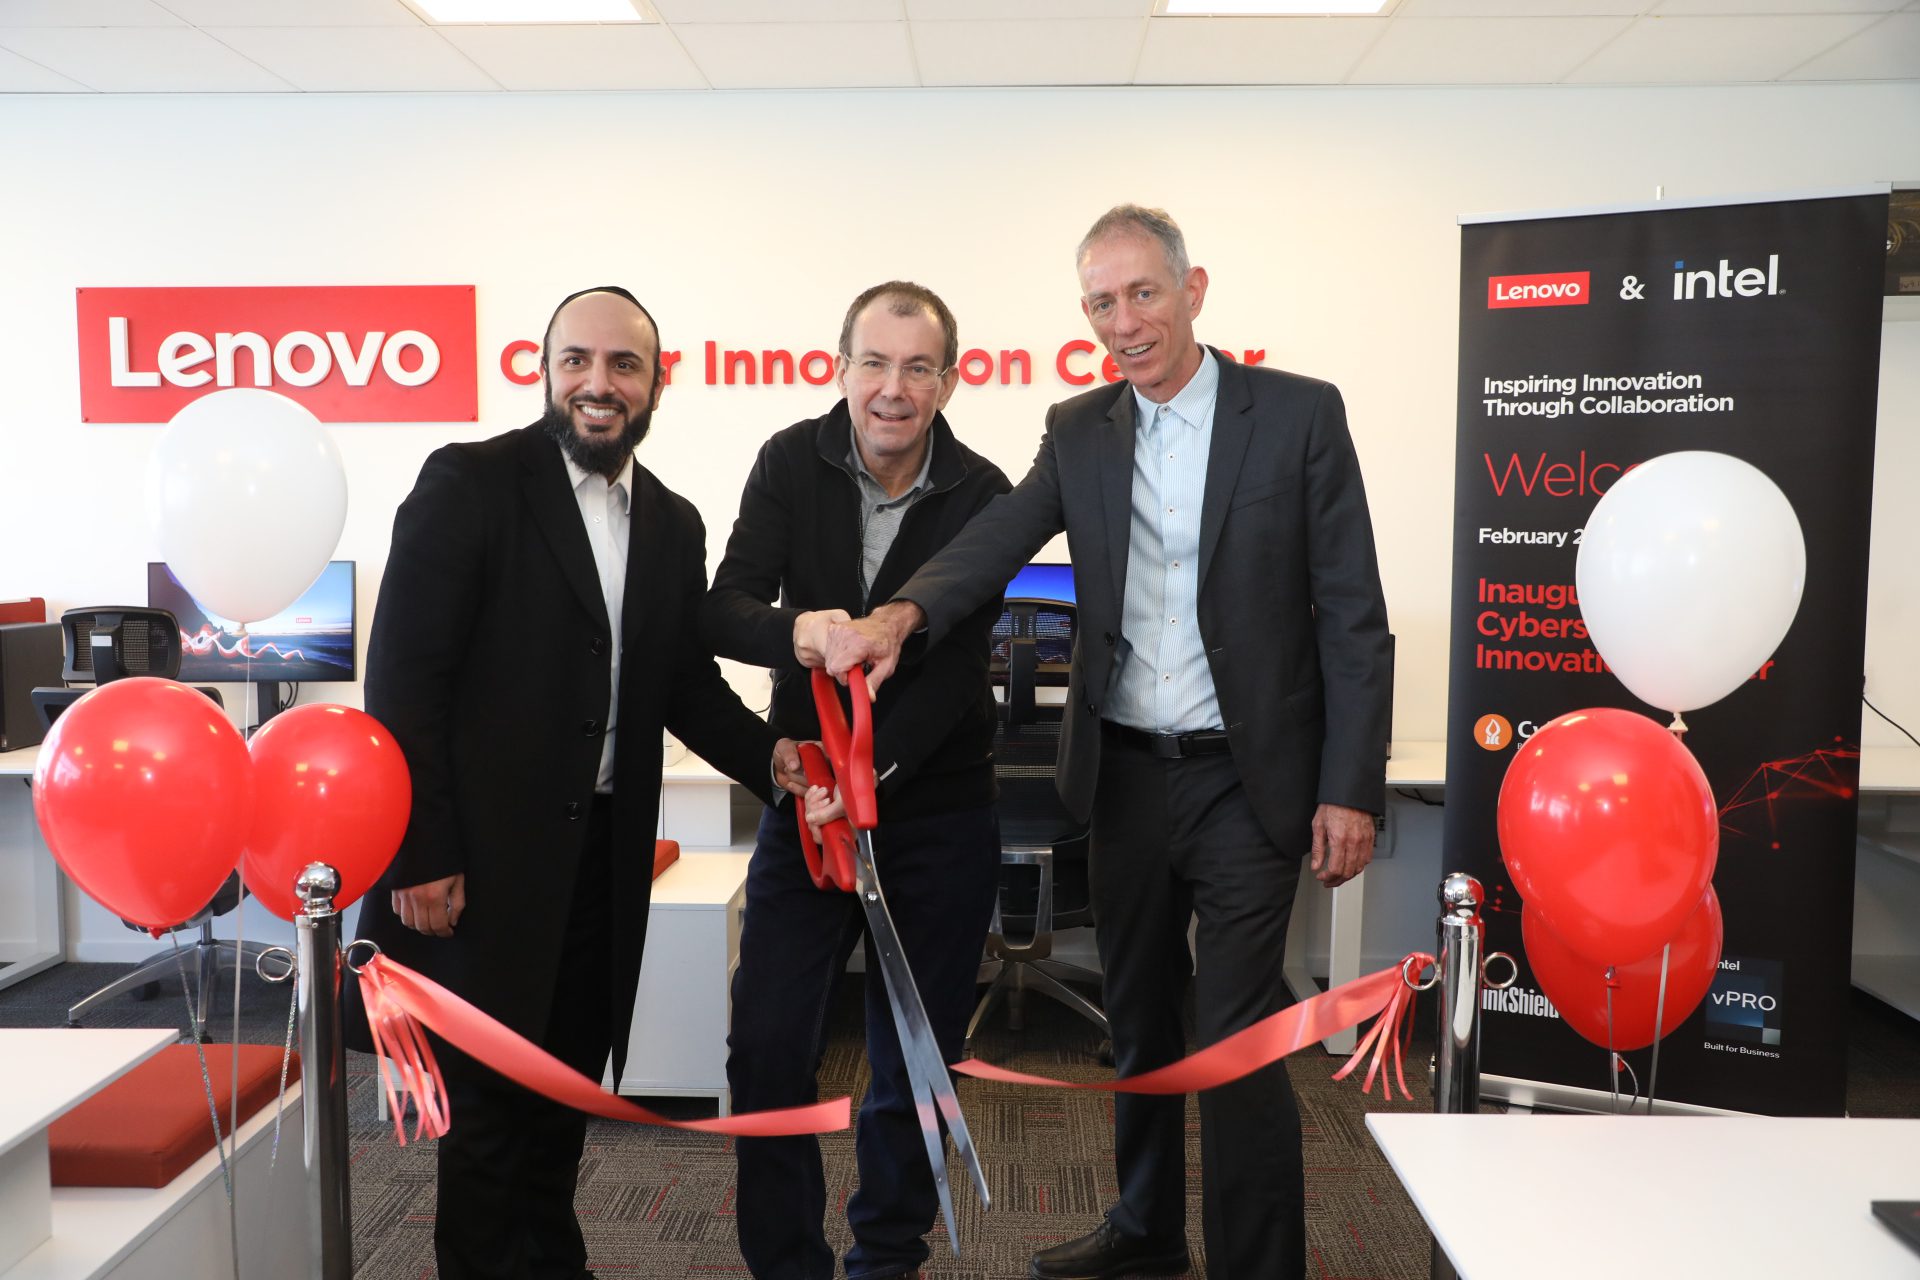 Nima Baiati, Executive Director & GM, Commercial Cybersecurity Solutions, Lenovo; Luca Rossi, President of Intelligent Devices Group, Lenovo; Prof. Yuval Elovici, Head of Ben-Gurion University Cyber Security Research Center